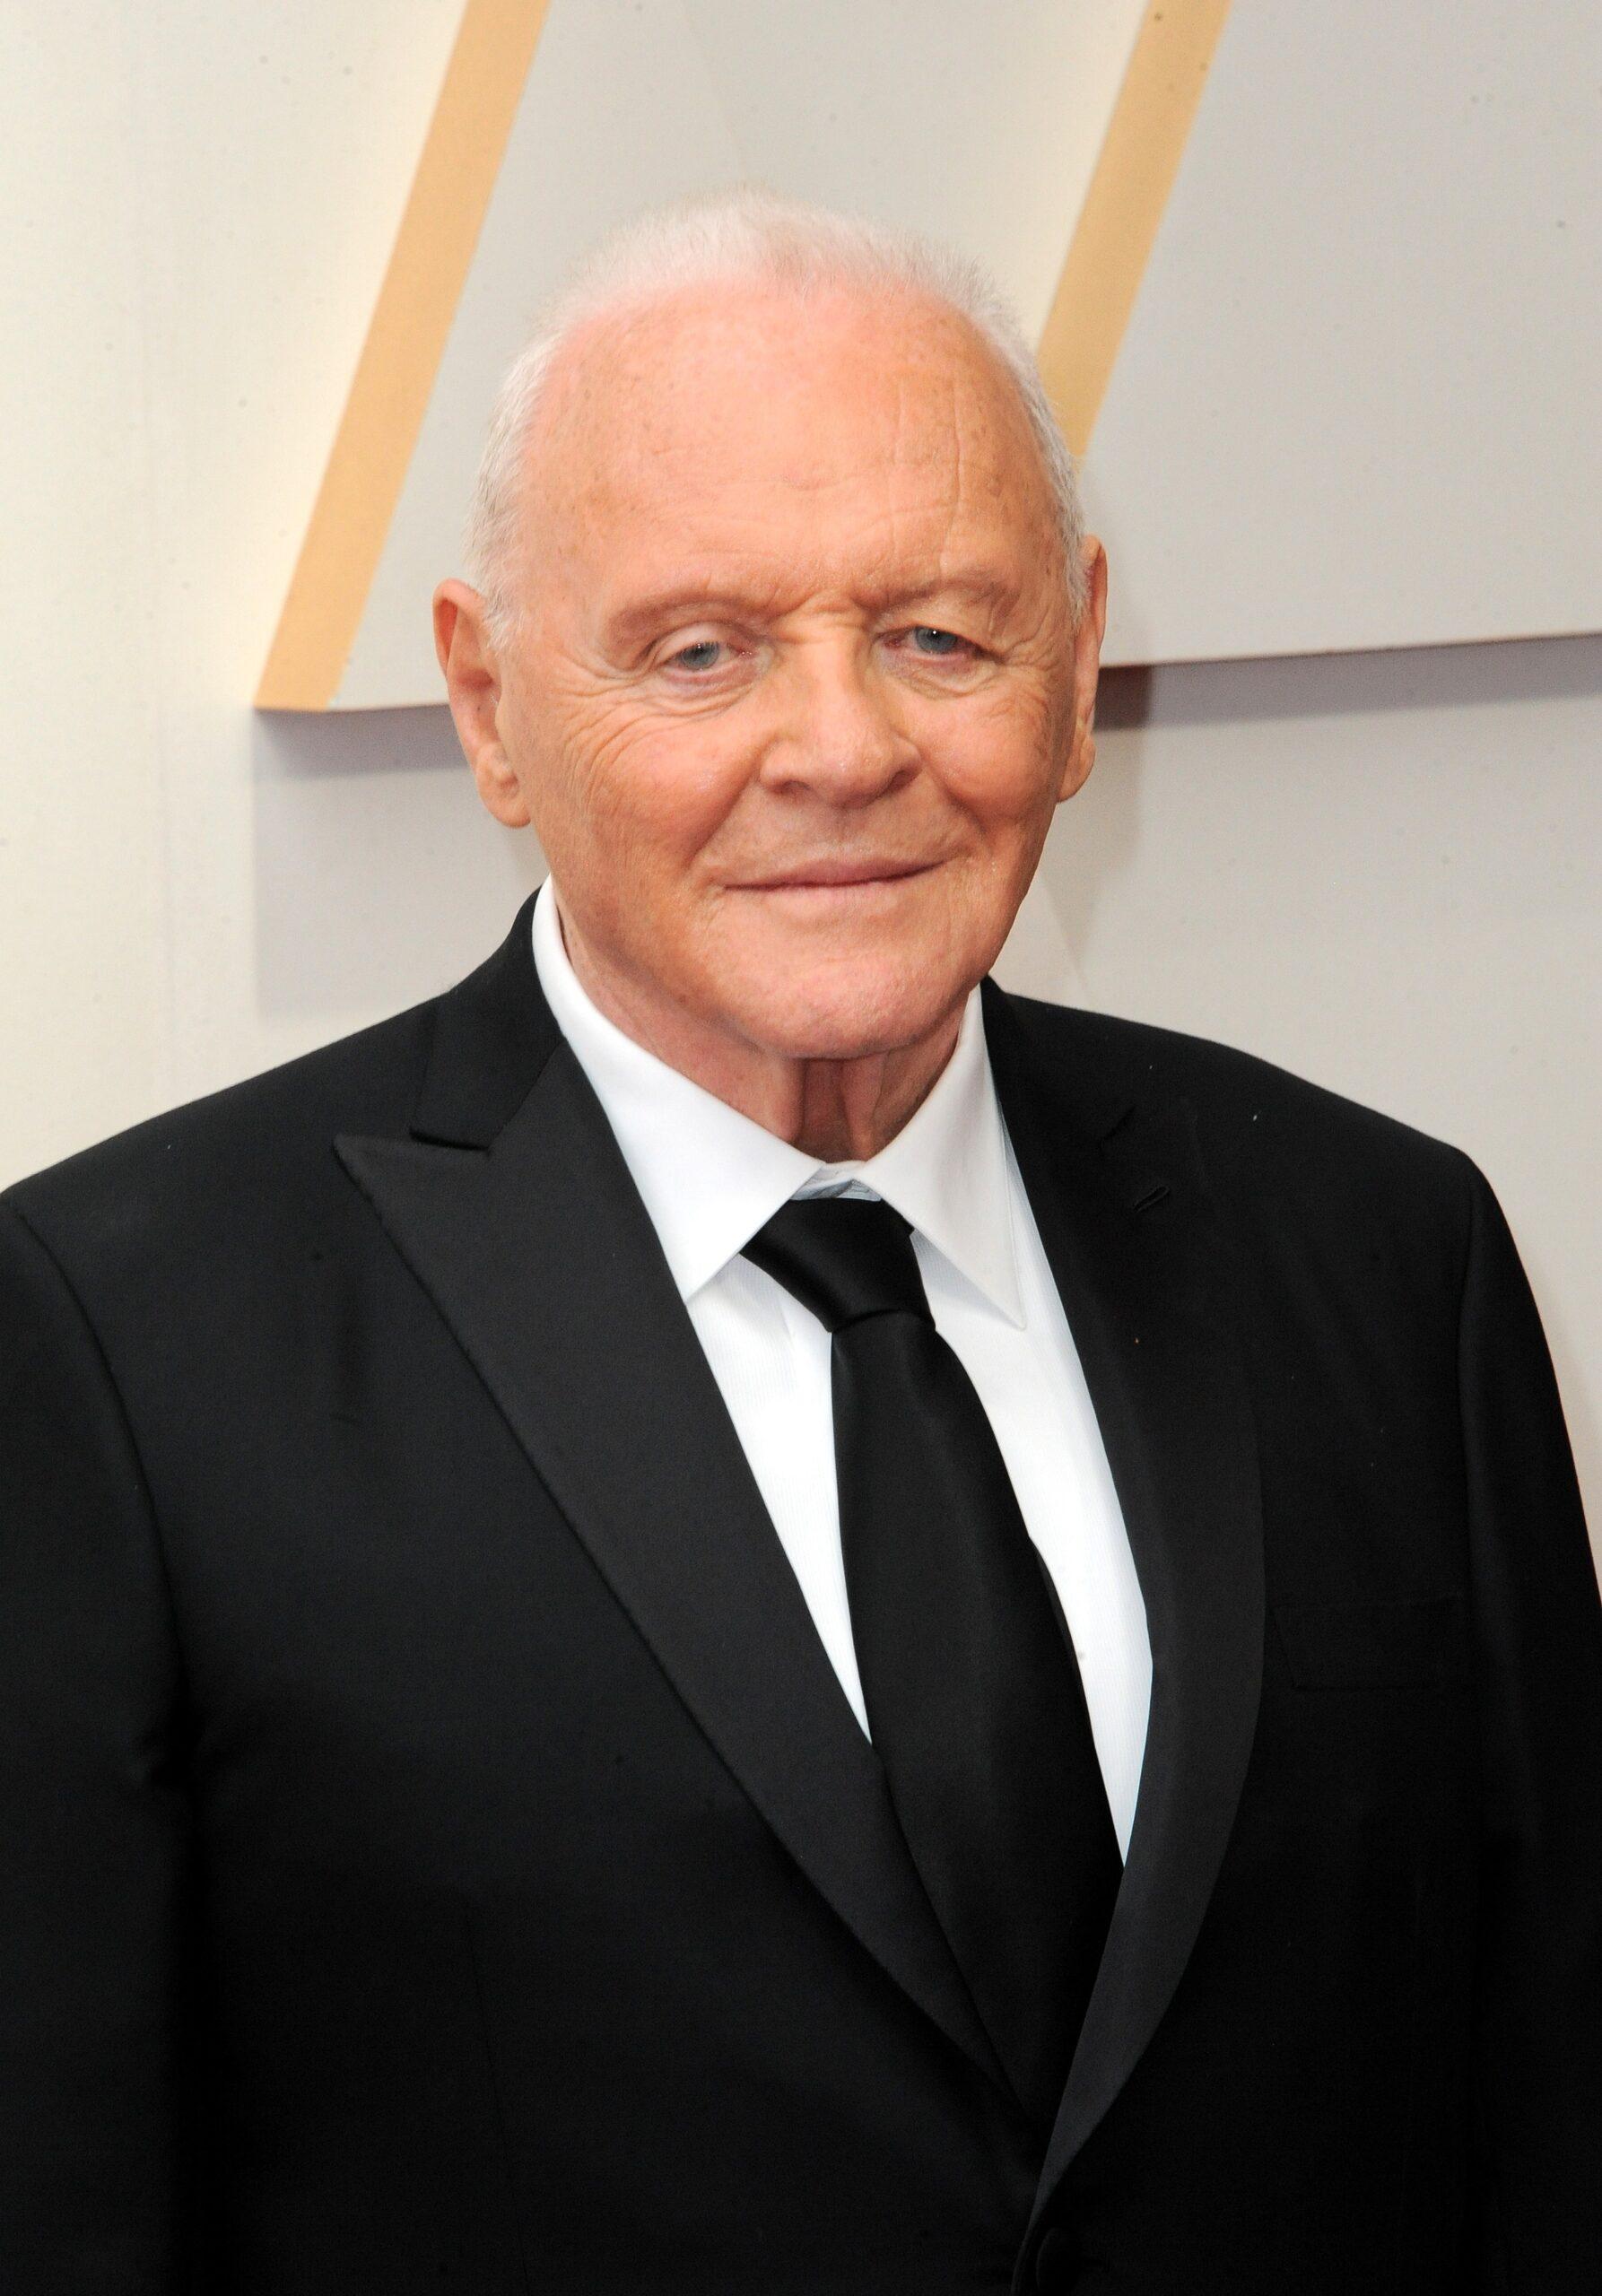 Anthony Hopkins Marks 48 Years Of Sobriety With Motivational Video ...